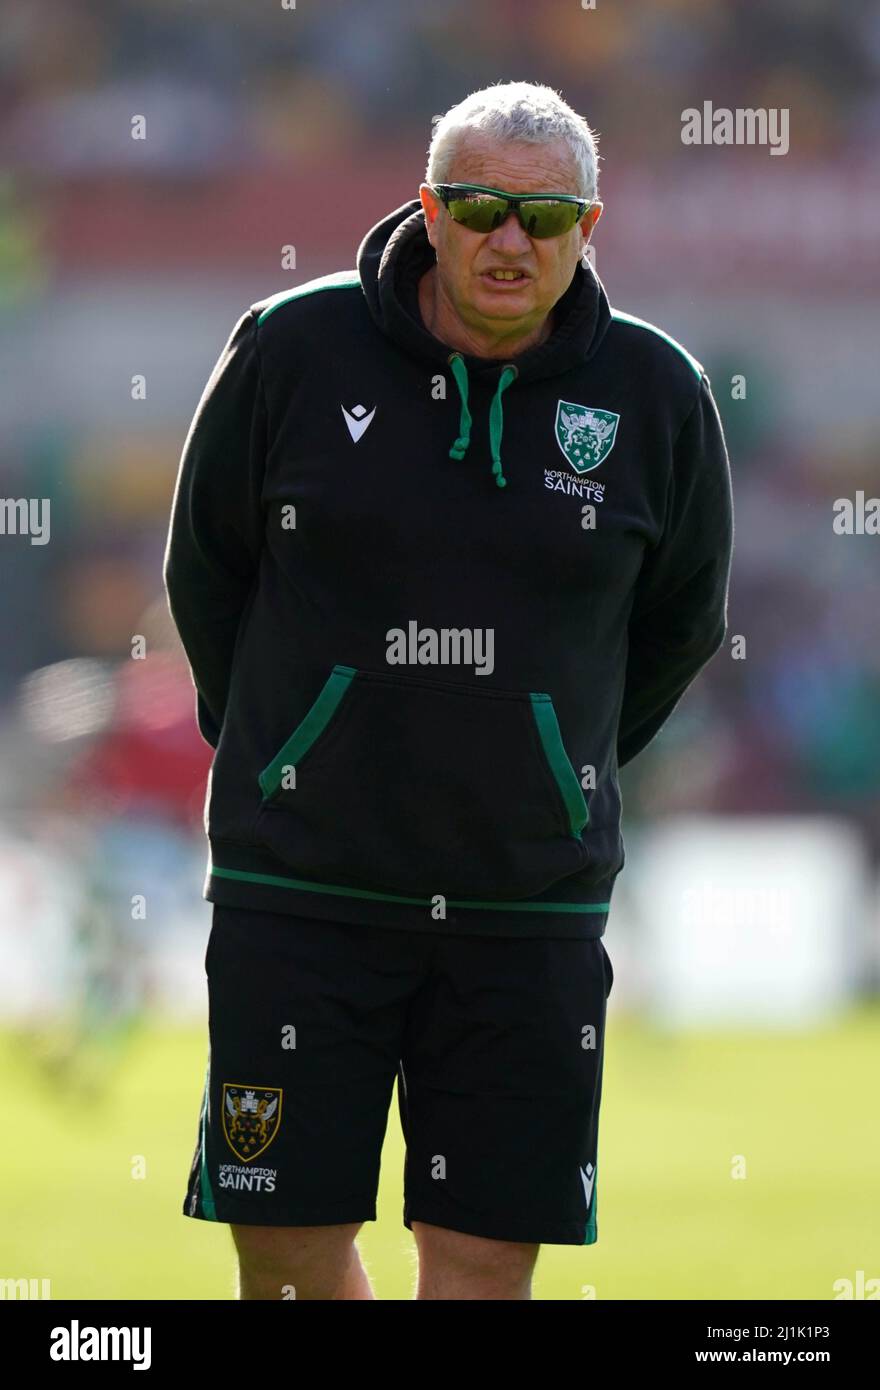 Northampton Saints Director Of Rugby Chris Boyd On The Pitch Before The Gallagher Premiership Match At The Brentford Community Stadium London Picture Date Saturday March 26 22 Stock Photo Alamy